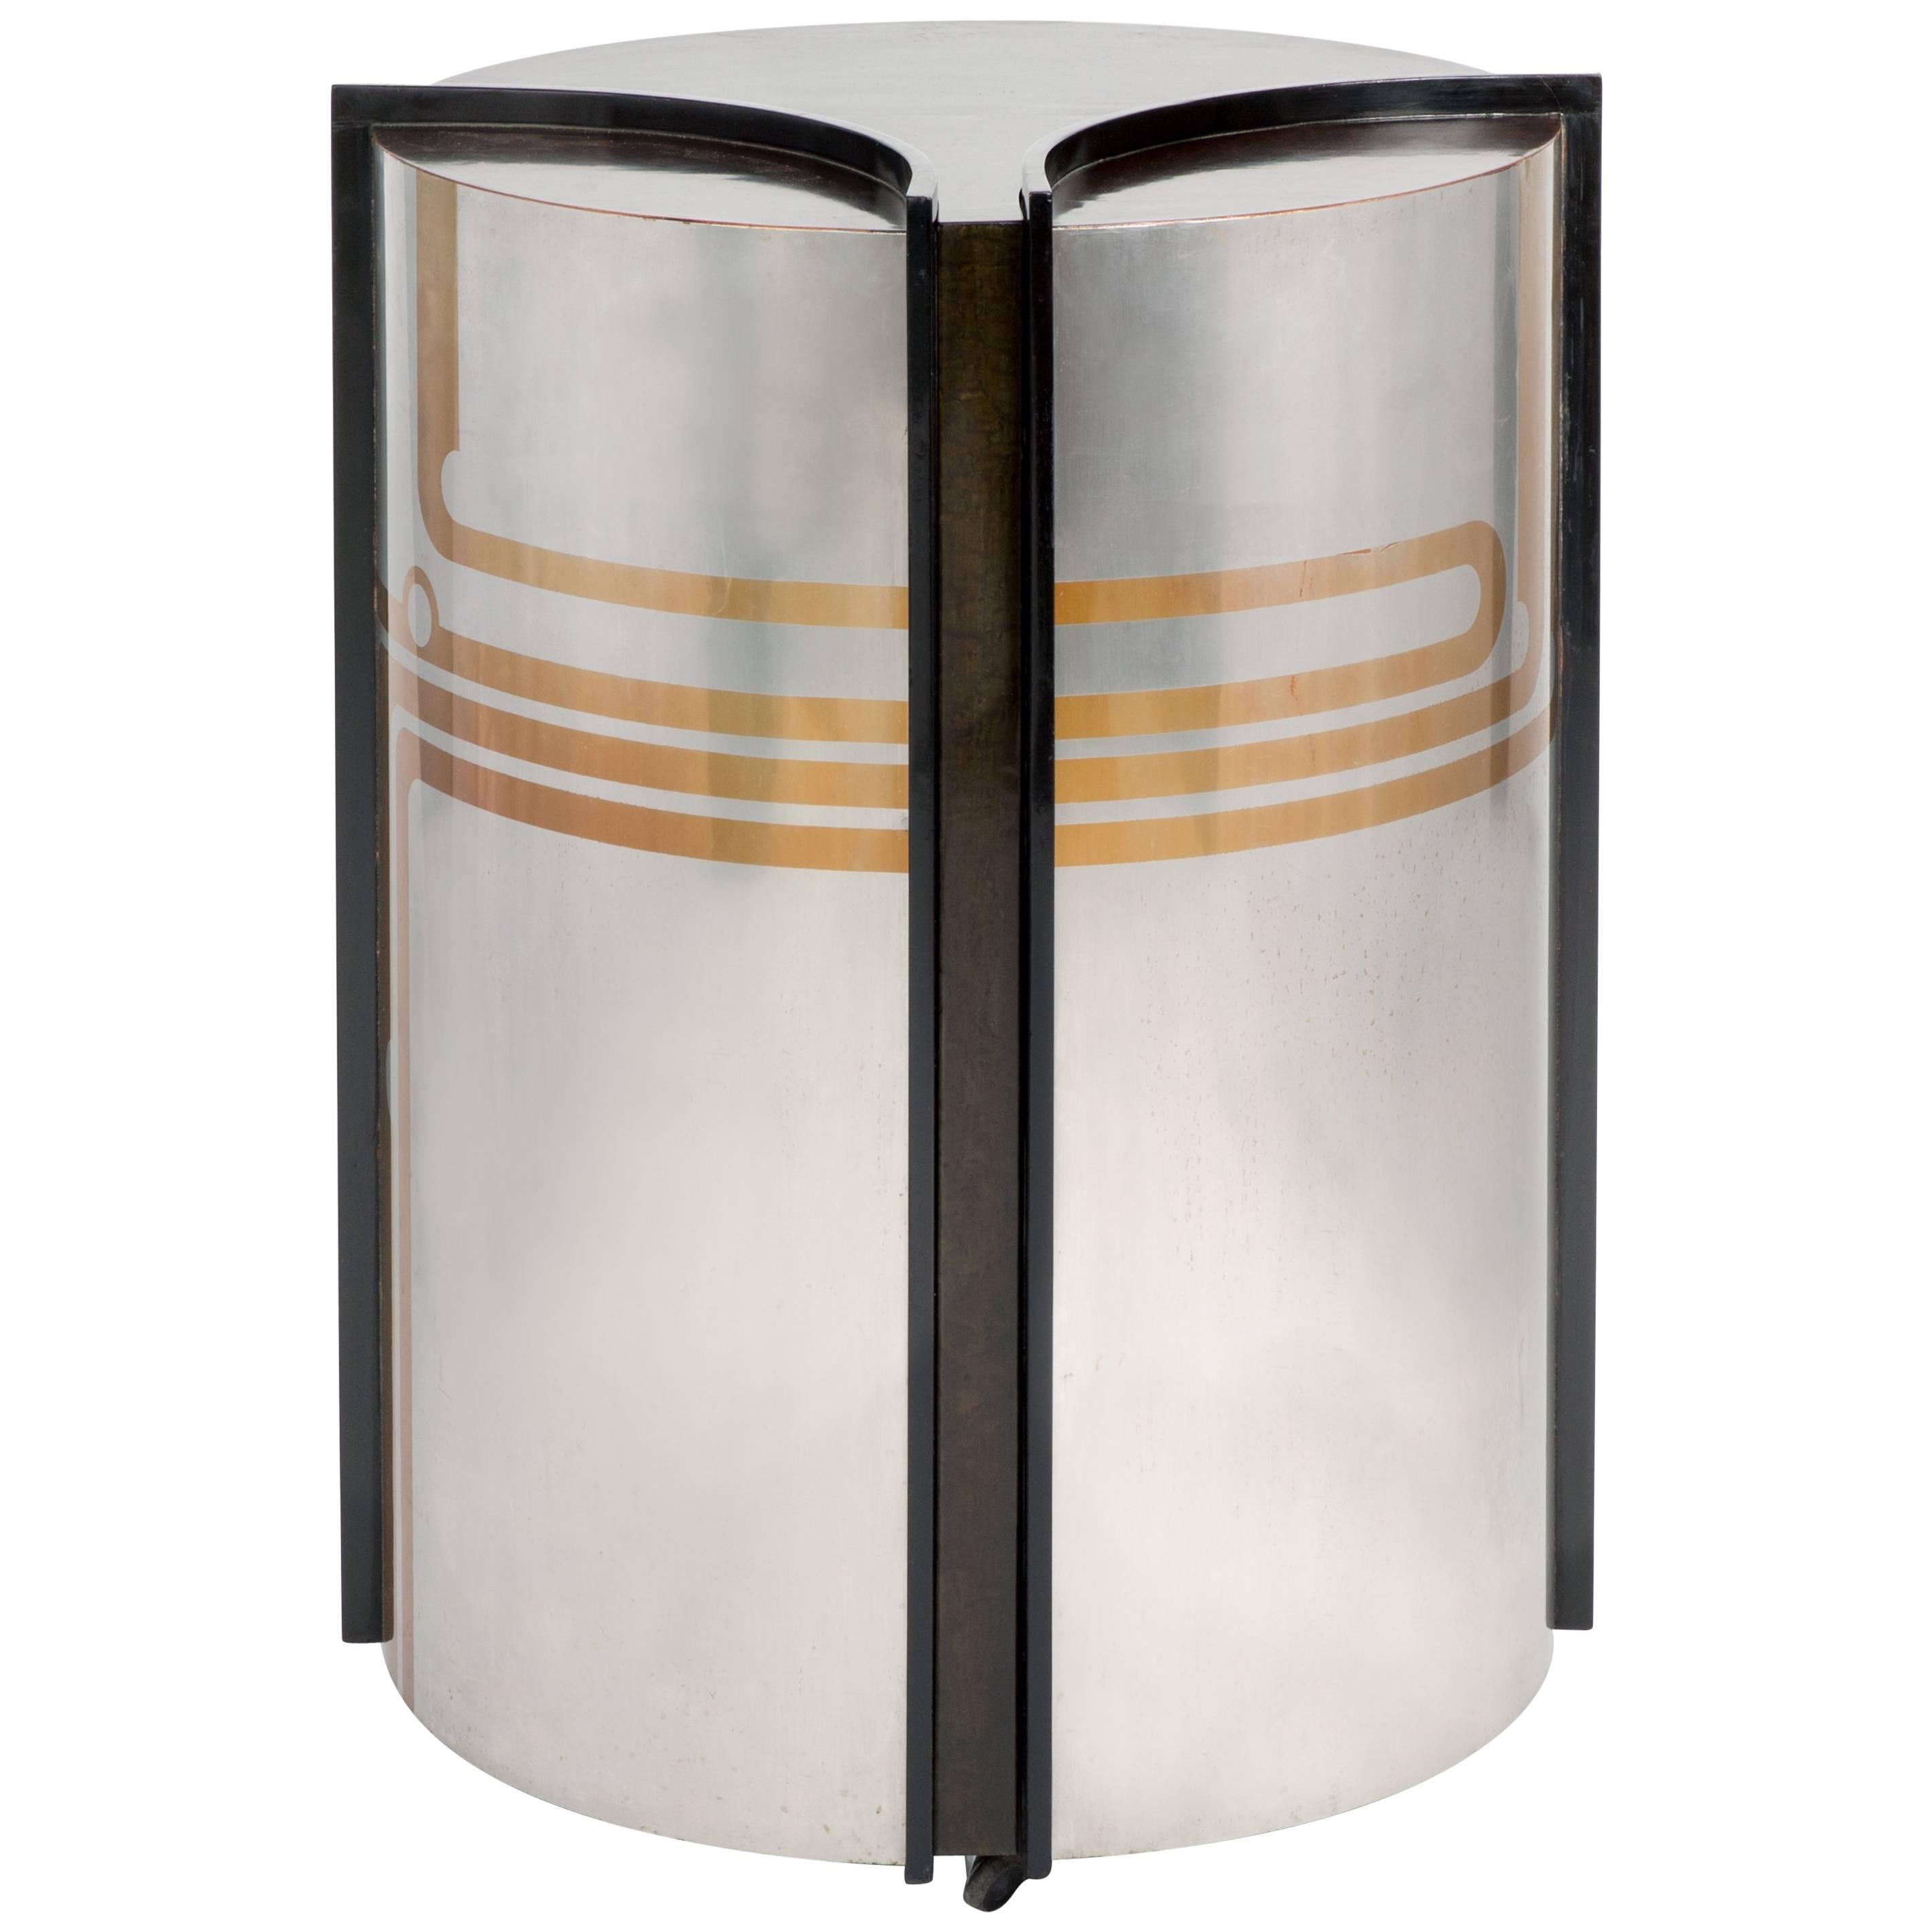 Pierre Cardin is an Italian-born French fashion designer known for avant-garde and Space Age designs, as demonstrated by this bar cabinet. 

Signed by Pierre Cardin on an interior plaque. The inside has one shelf in the main body of the piece and